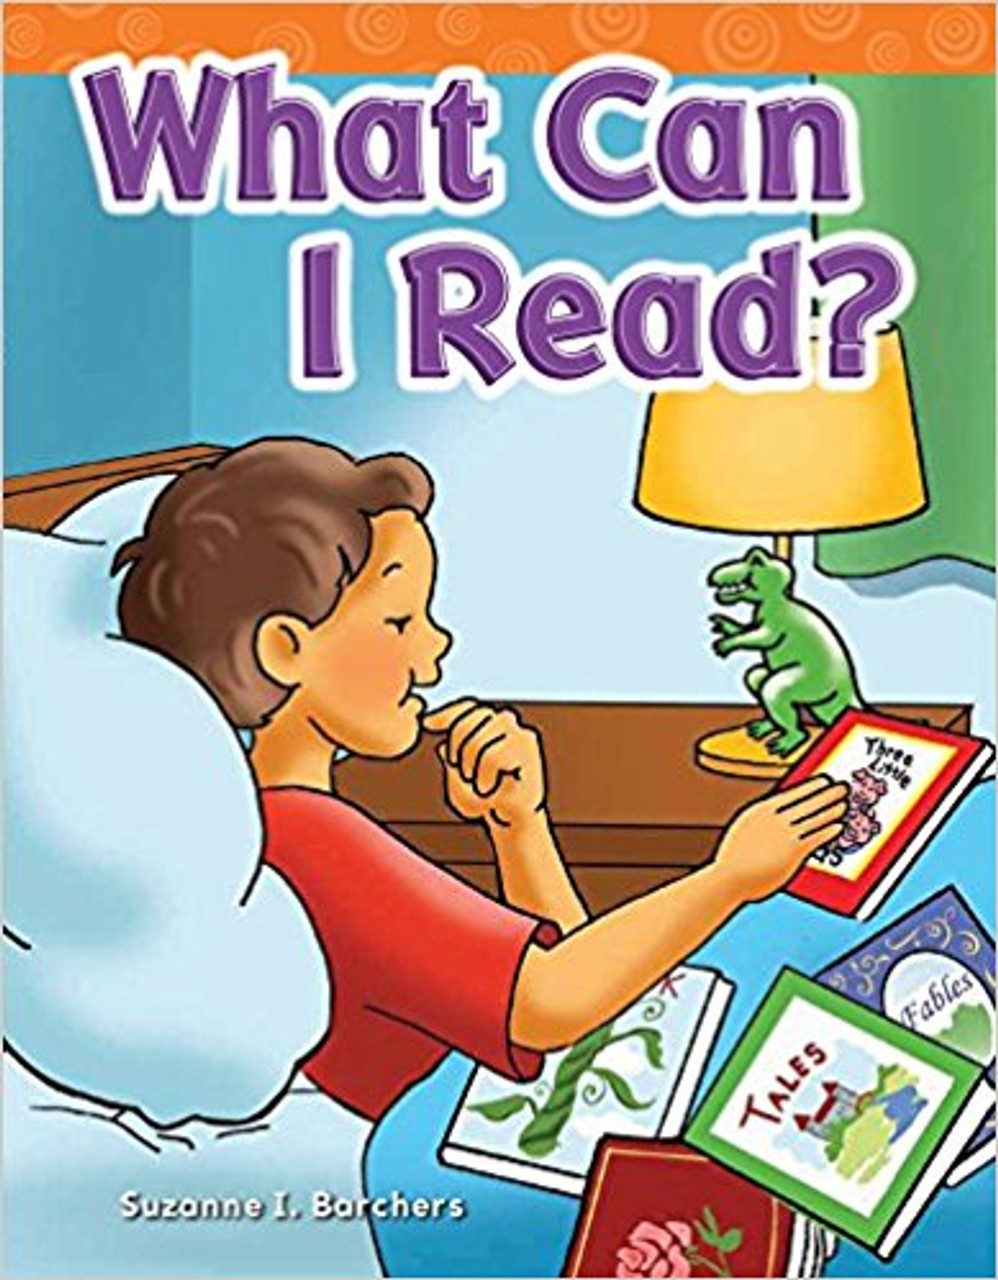 What Can I Read? by Suzanne I Barchers